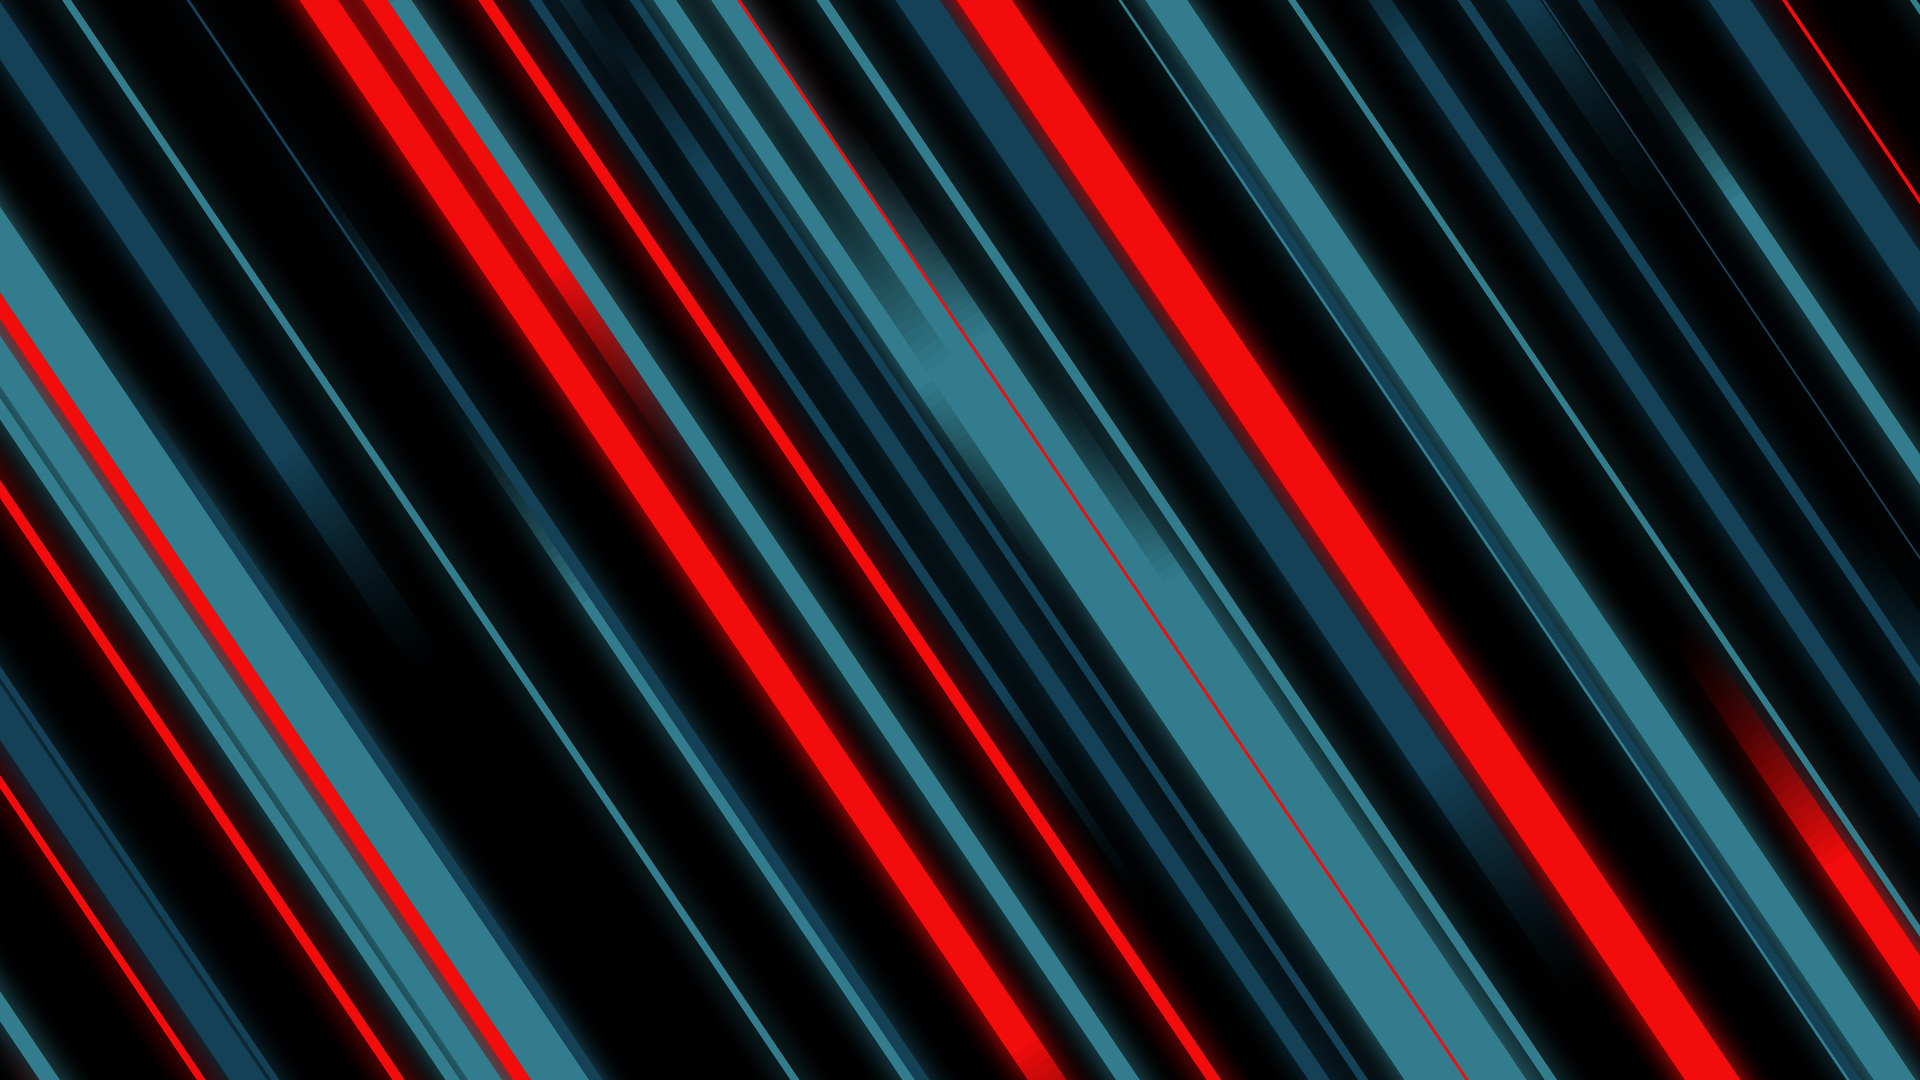 material-style-lines-abstract-4k-cb.jpg